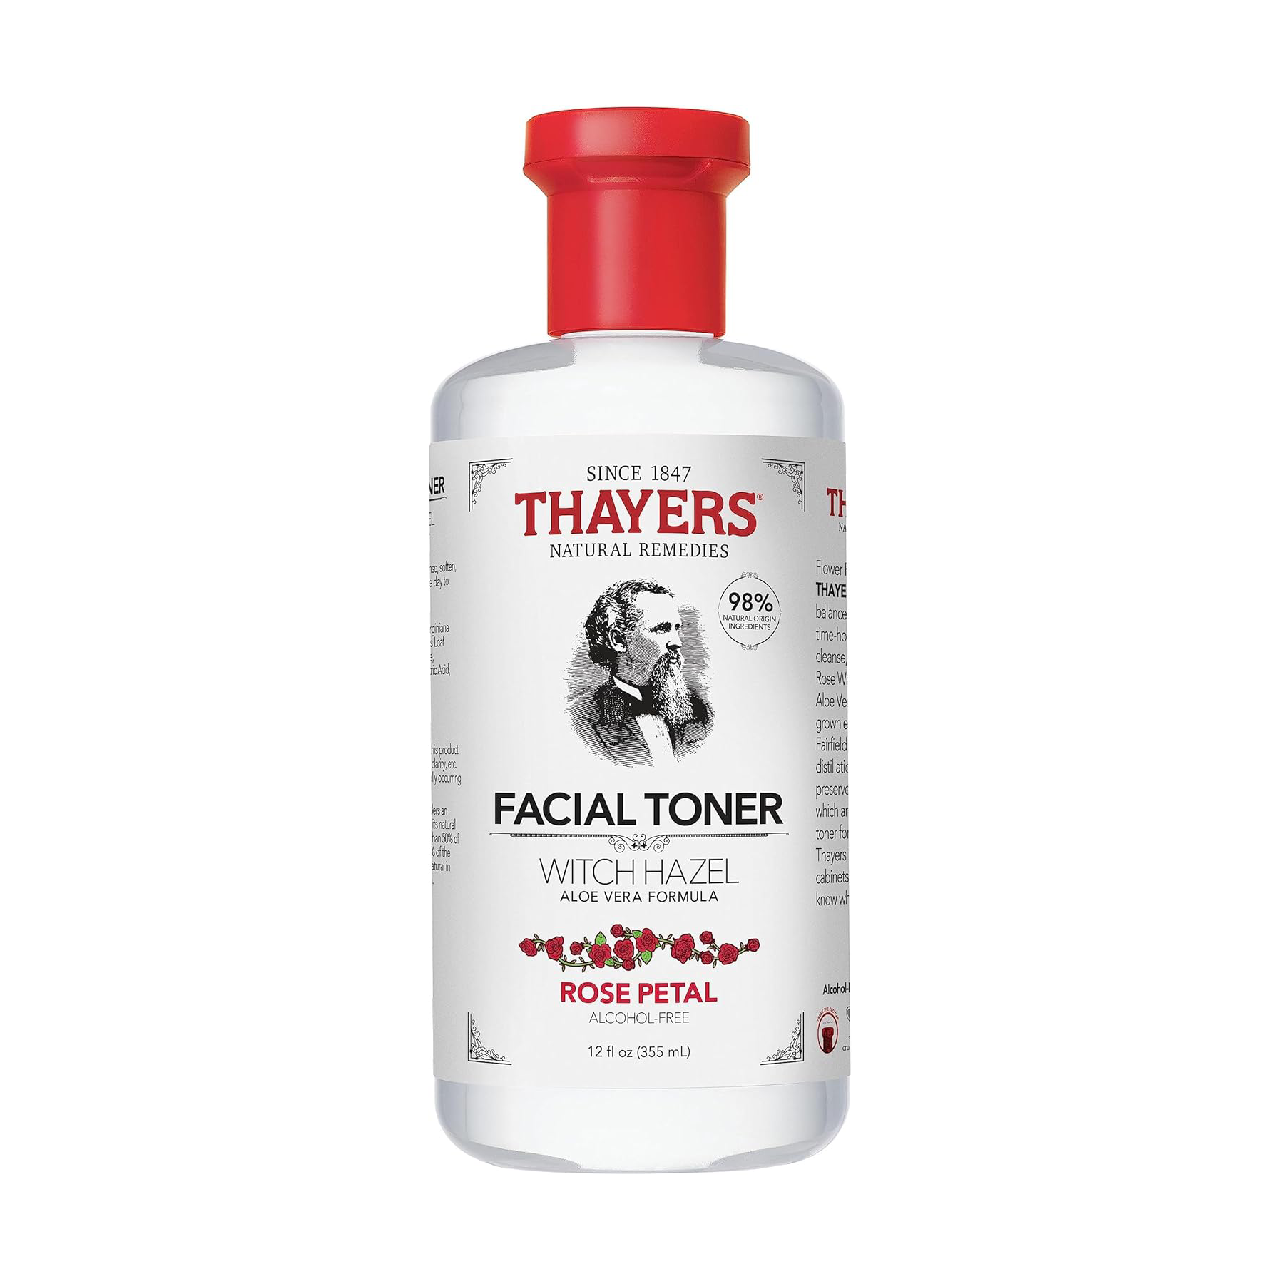 Bottles of Thayers Witch Hazel Facial Toner and Caudalie Beauty Elixir against a white background